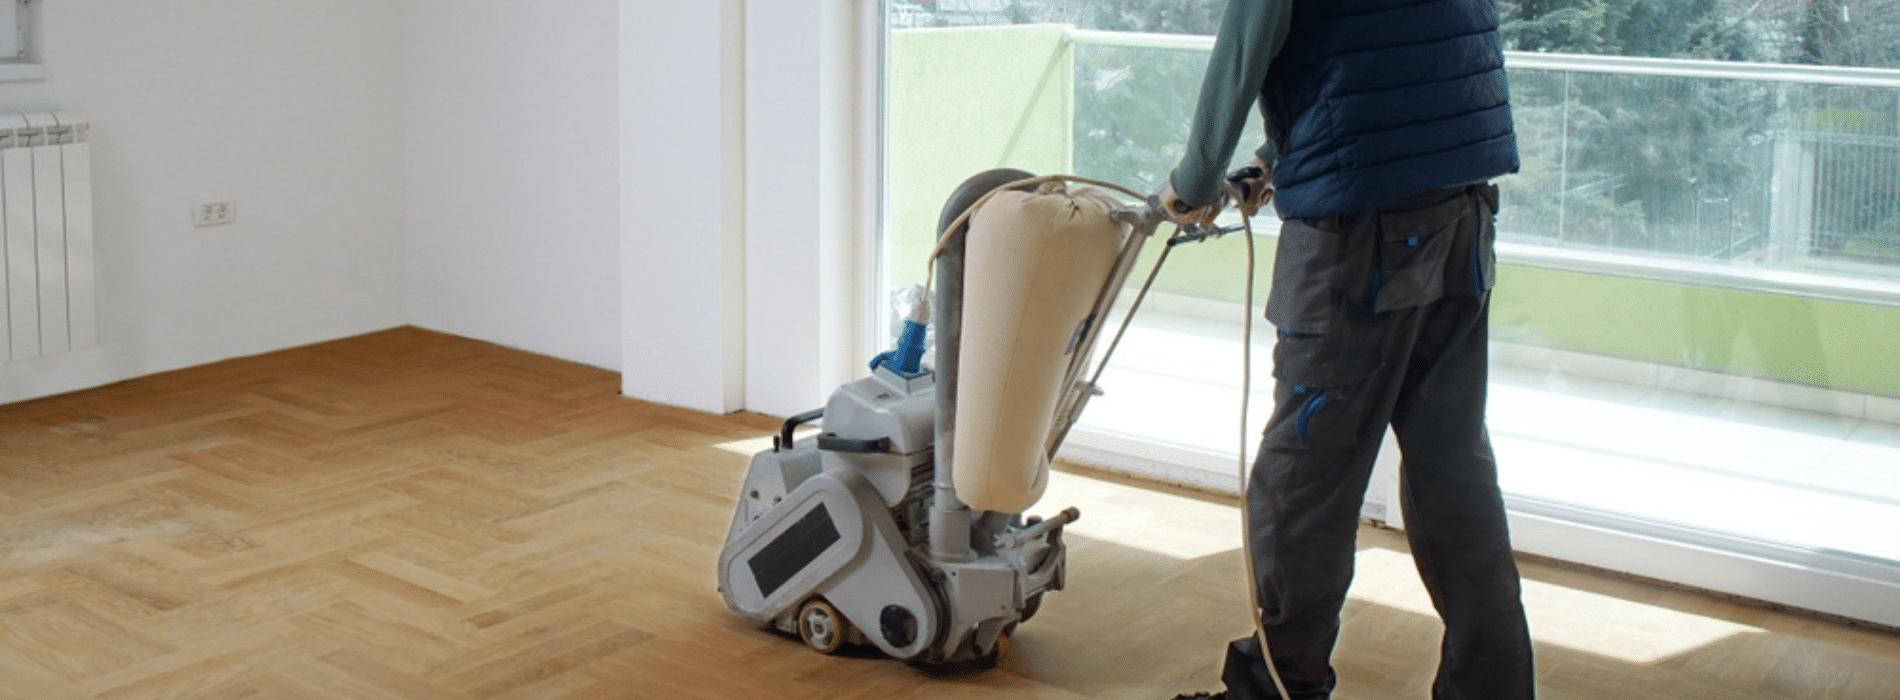 In Nunhead, SE15, Mr Sander® use a Bona Scorpion drum sander (200mm dimension, 1.5kW effect) connected to a dust extraction system with a HEPA filter for a clean result. Operating at 240V voltage and 50Hz frequency, they ensure efficient floor sanding while maintaining a dust-free environment. 